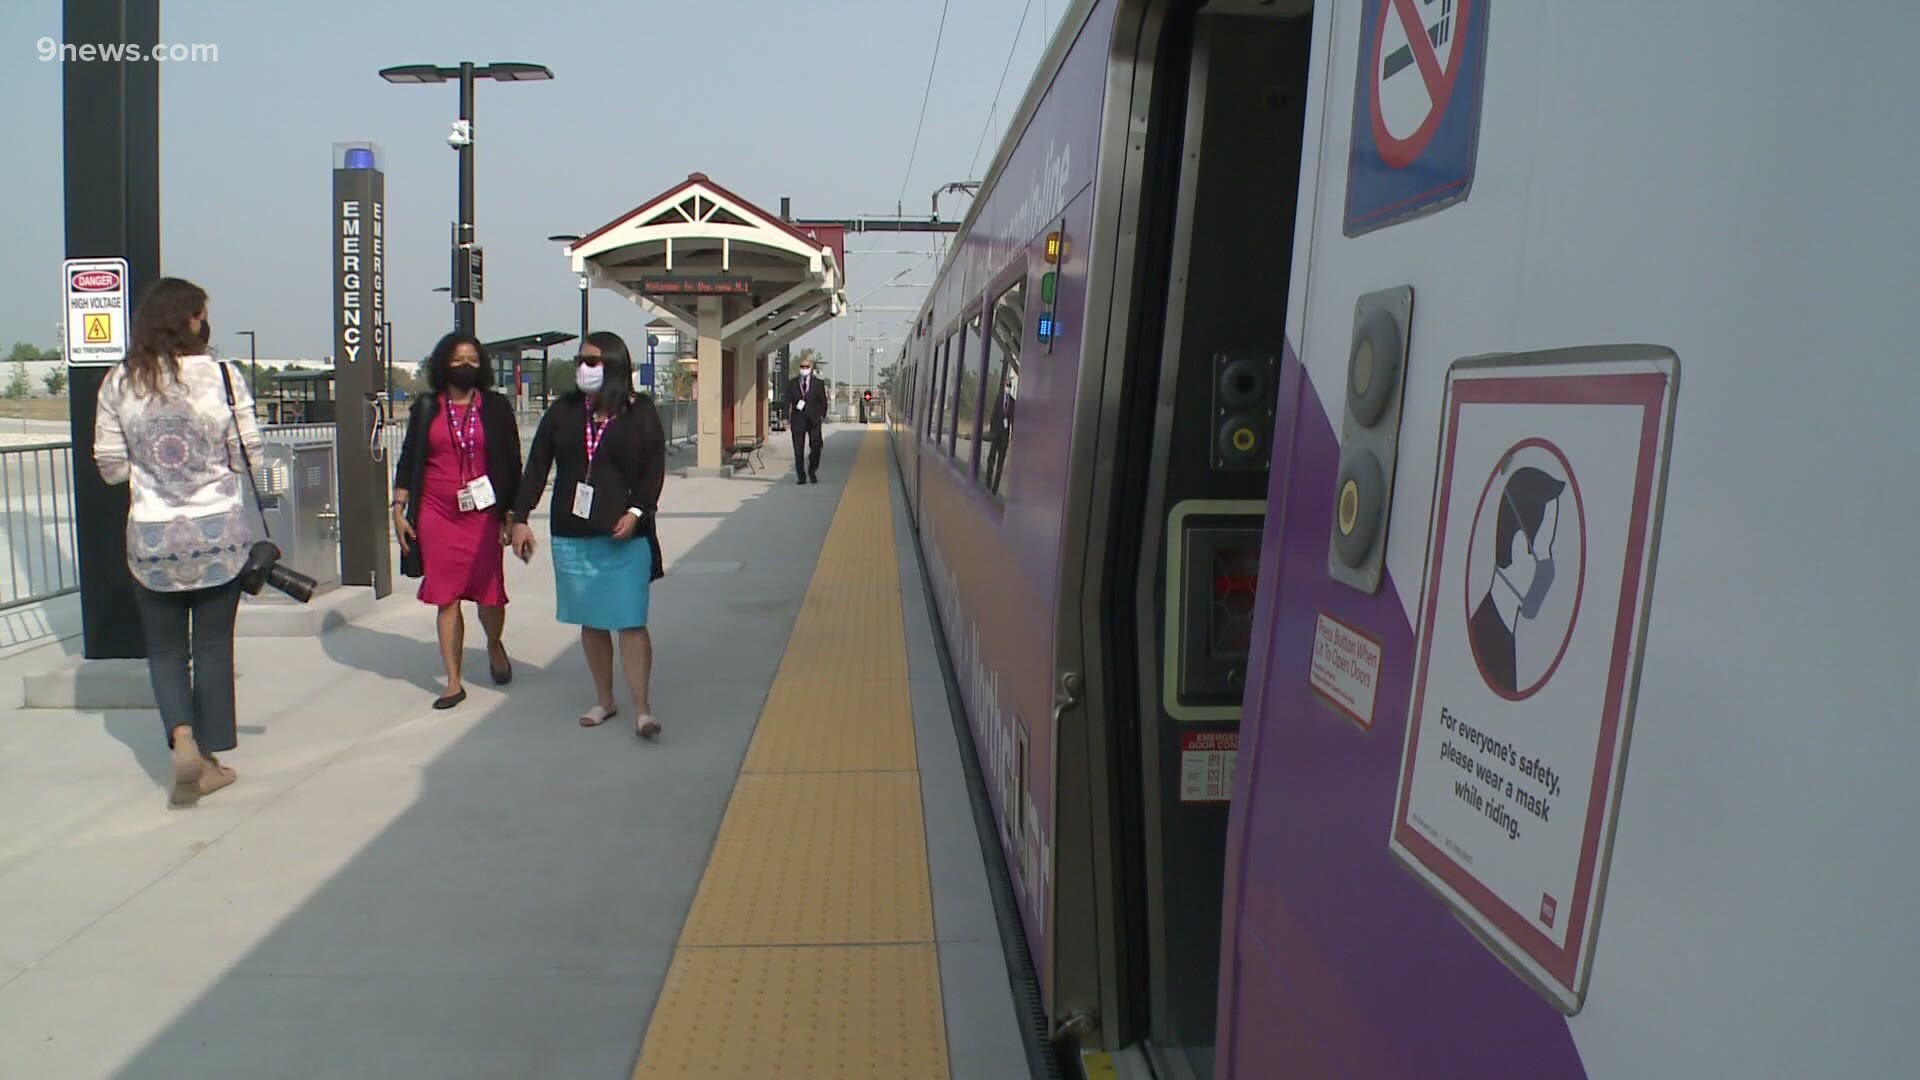 The transit agency said riders must still wear a mask while waiting for and riding RTD vehicles.